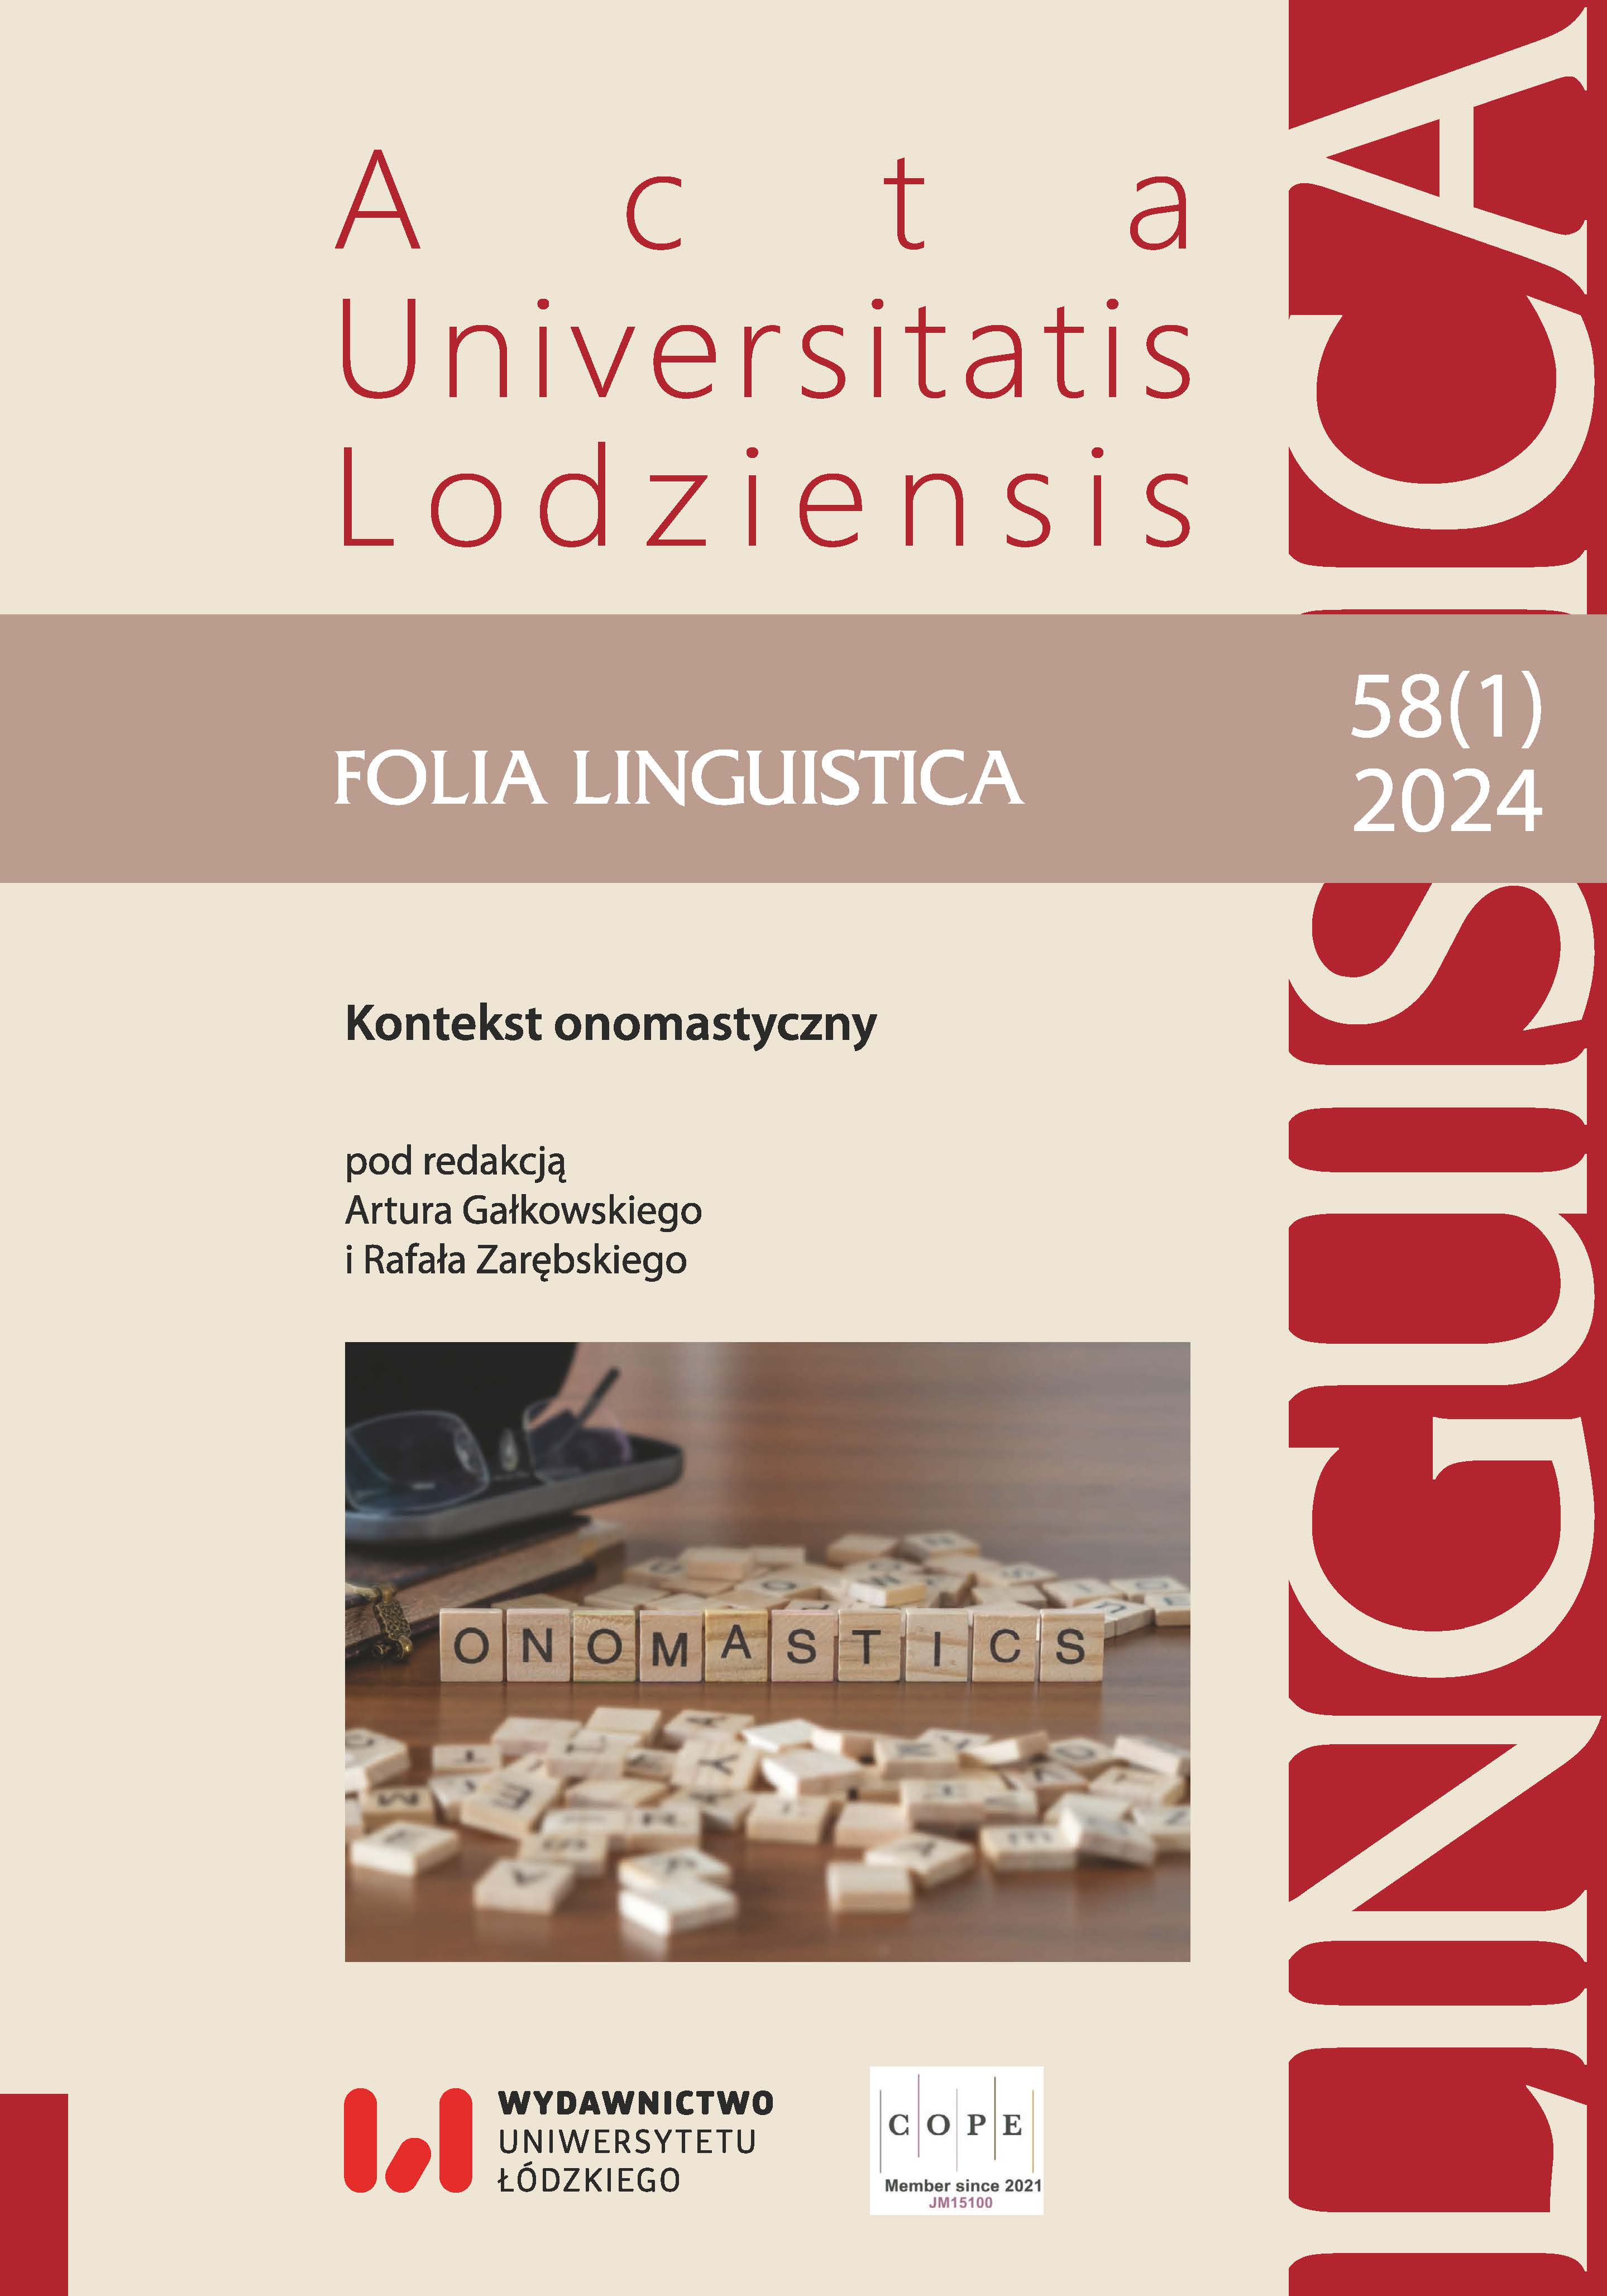 National identity transformations in the Galician German community between 1900 and 1938 based on a socio-onomastic analysis of the names given to children at baptism. Case studies of colonies: Podrzecze-Unterbach and Lednica Niemiecka Cover Image